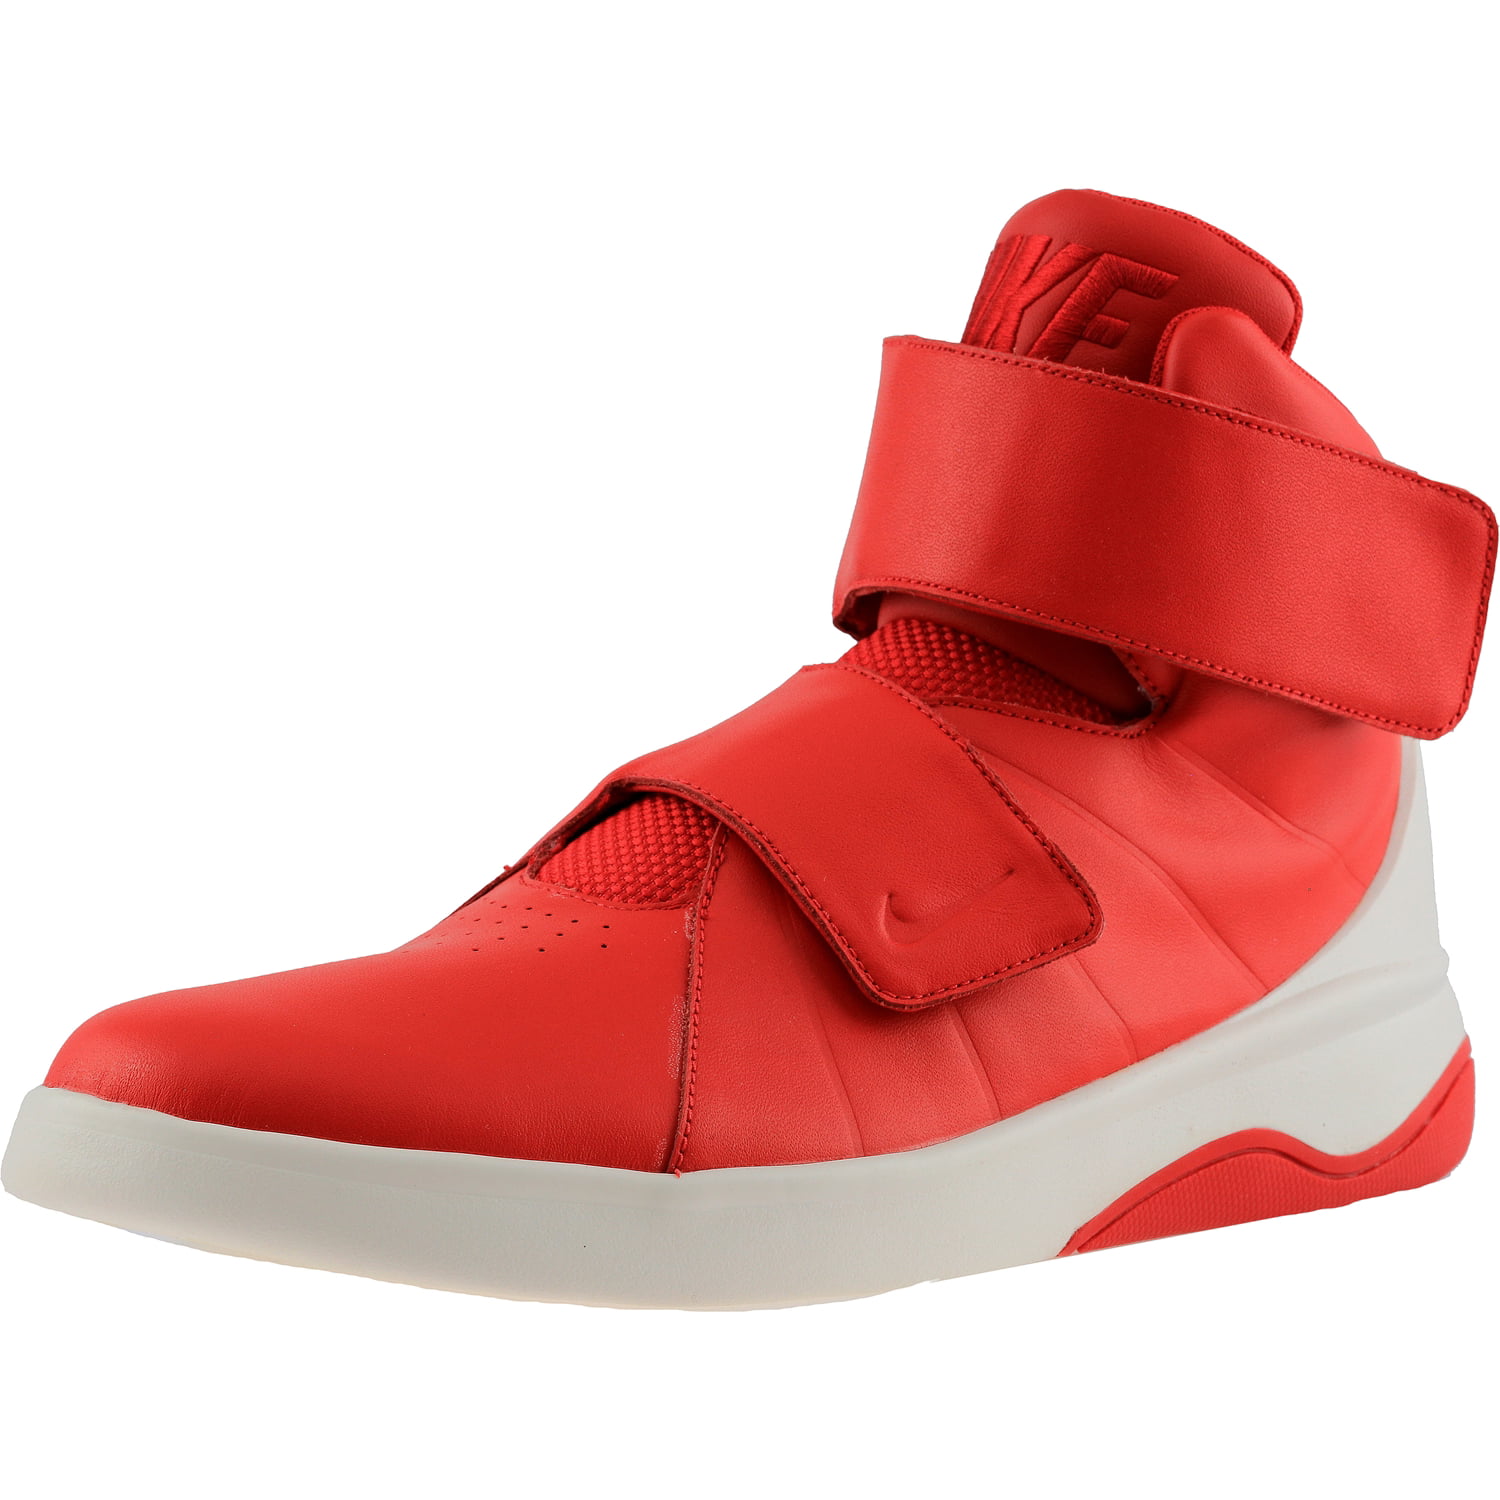 red nike shoes with straps